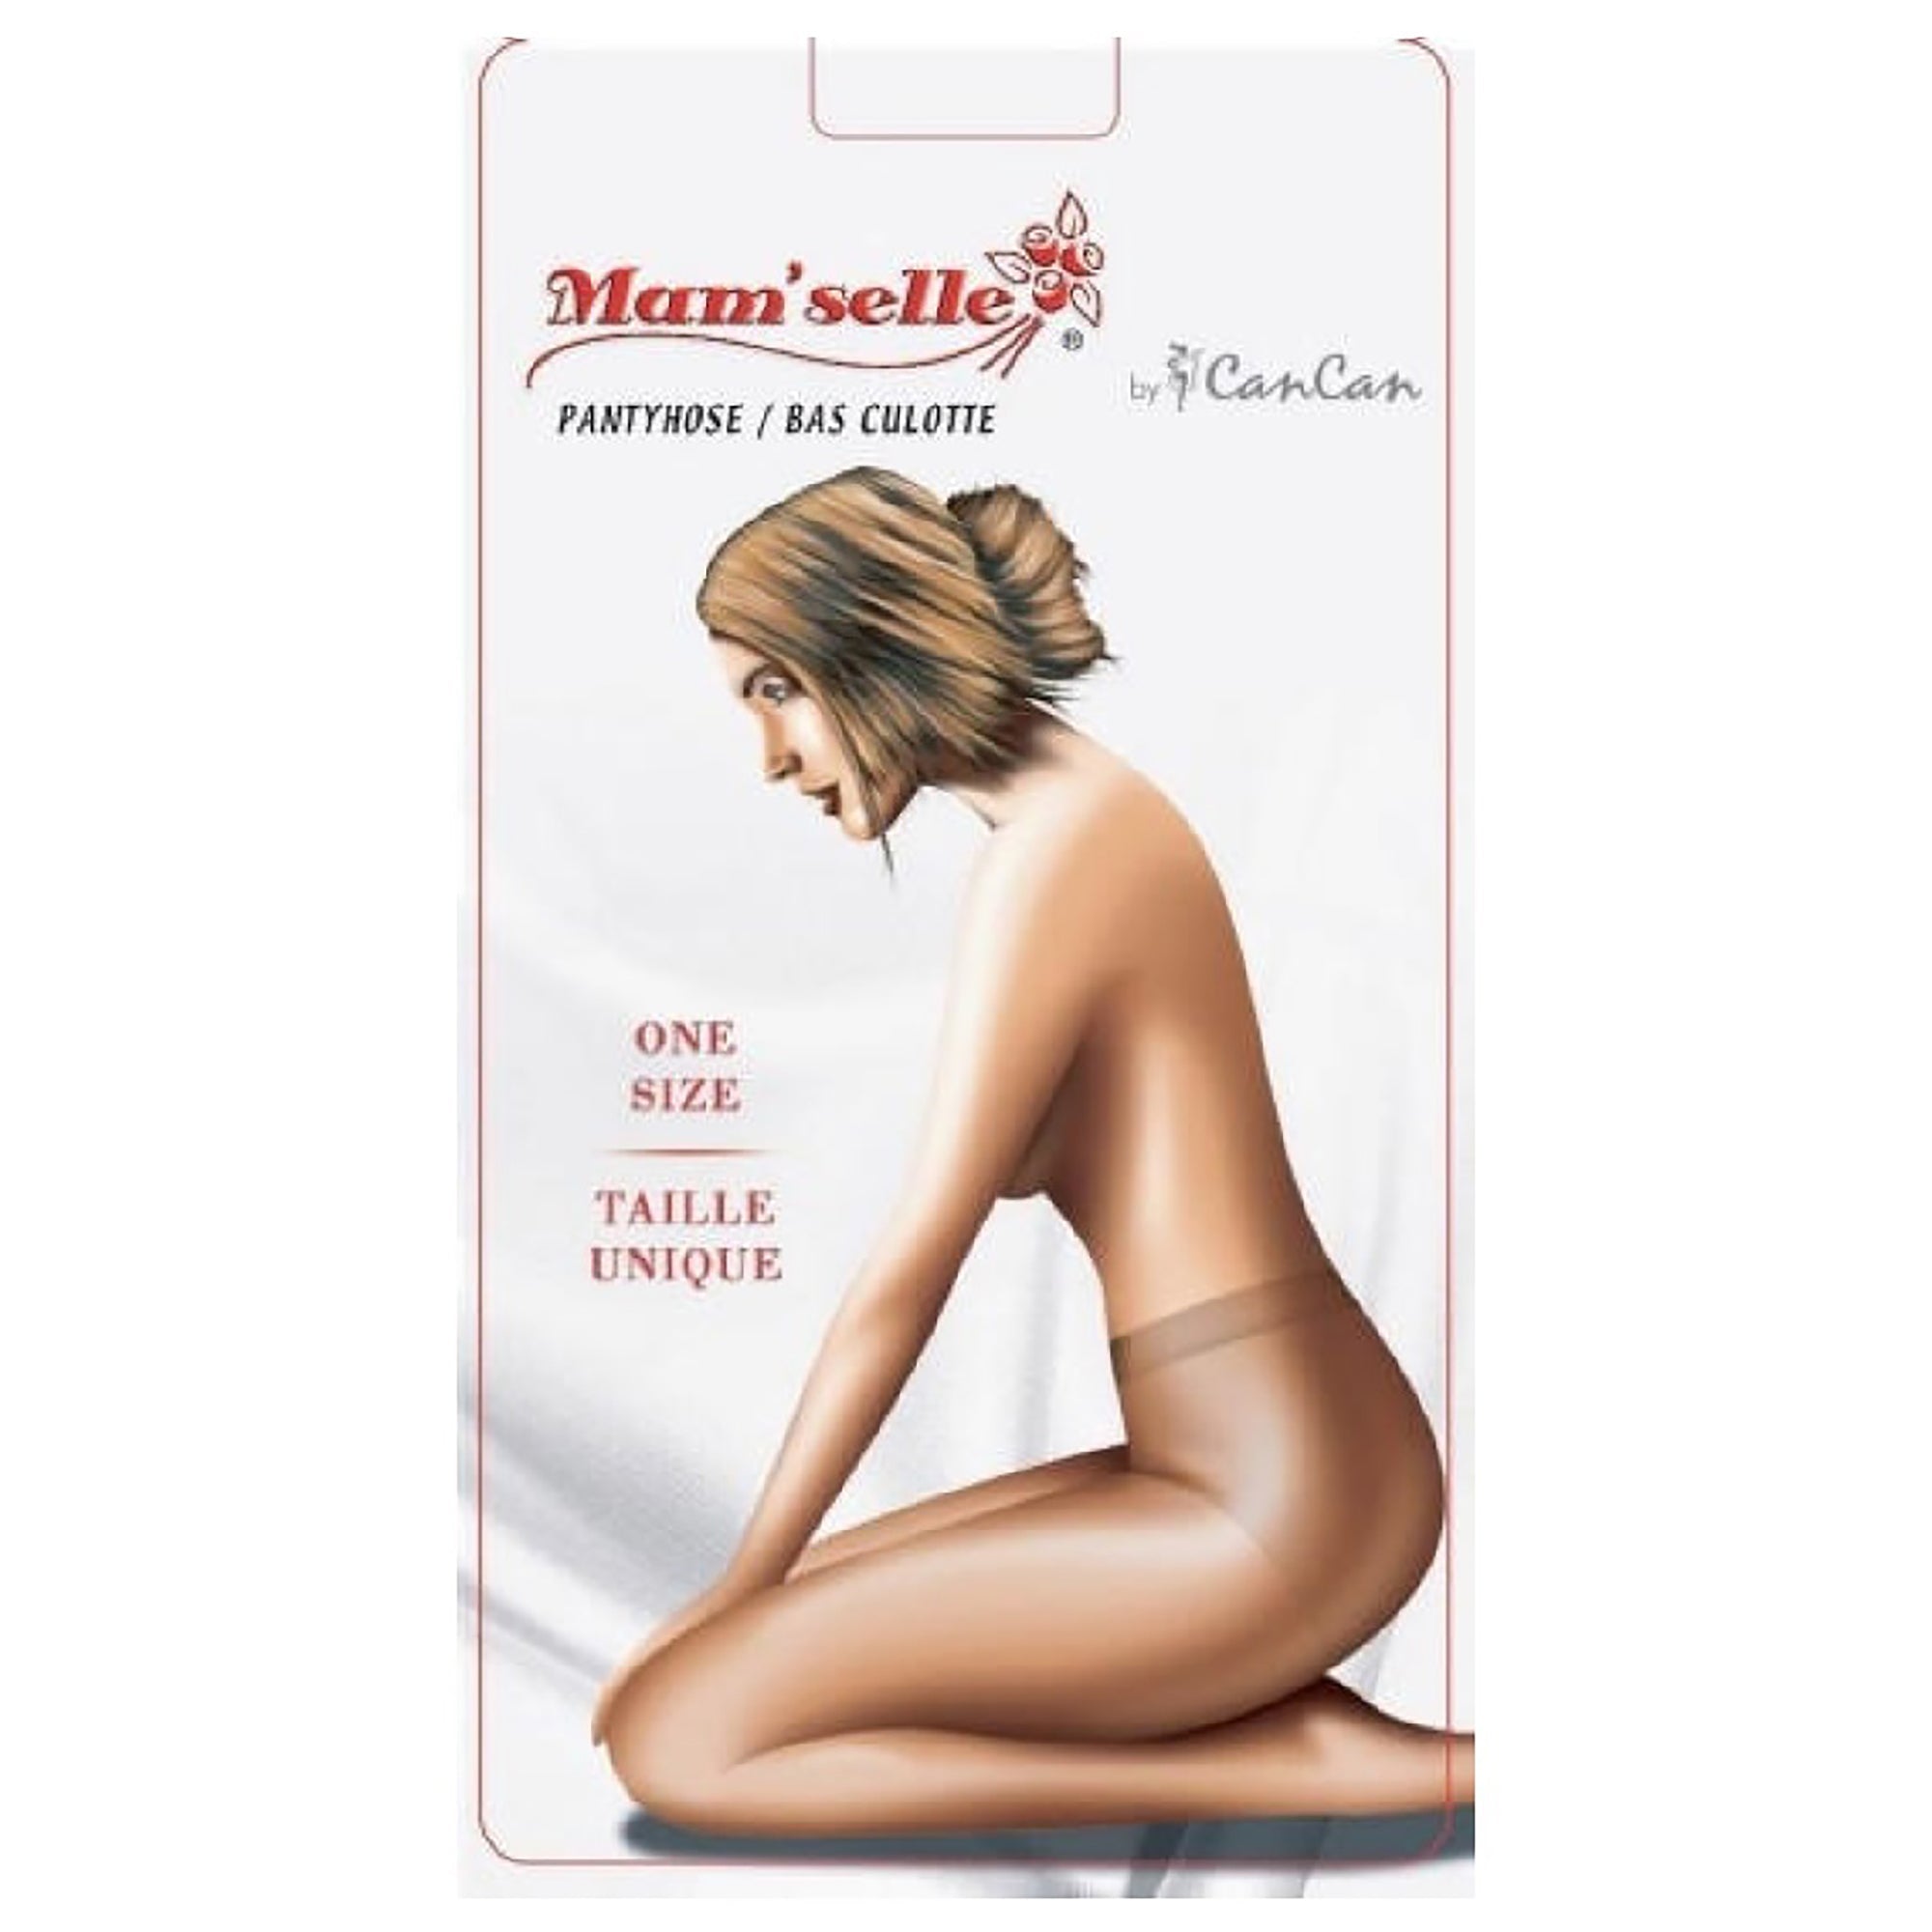 Mam'selle Panty Hose - Taupe 20 Denier - One Size (100-150lbs)